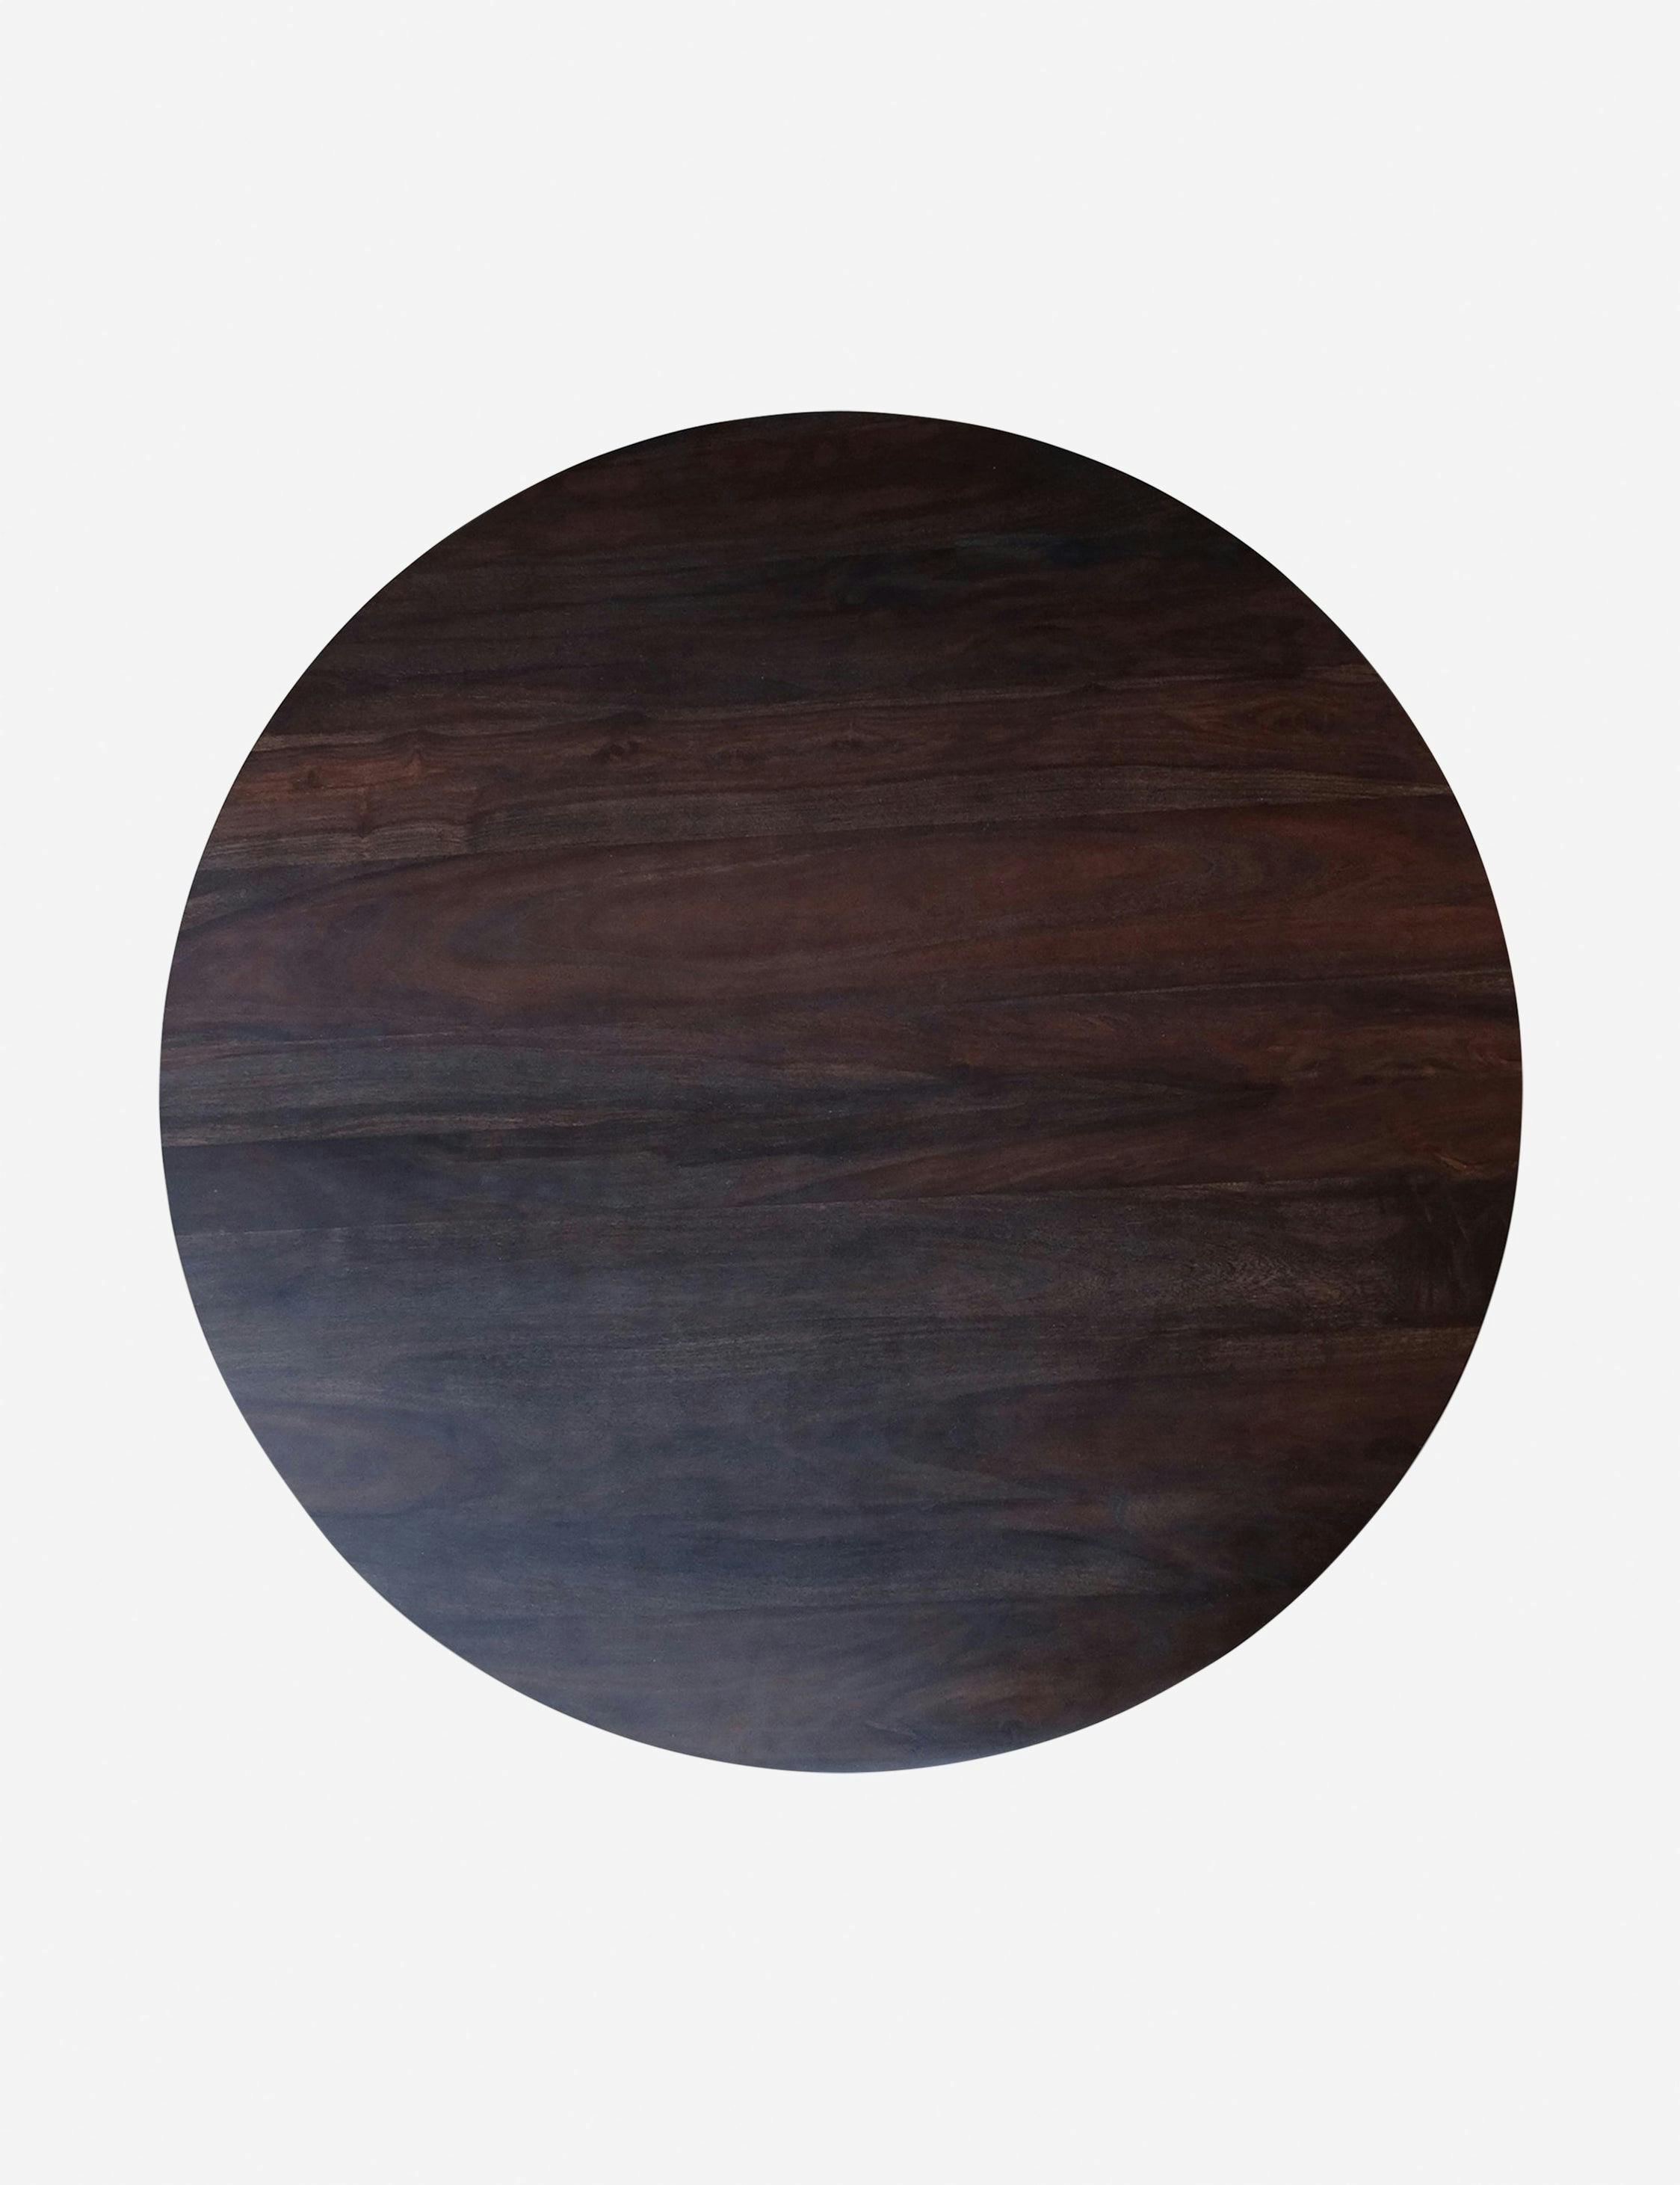 Contemporary Belize 46'' Dark Brown Solid Sheesham Round Dining Table